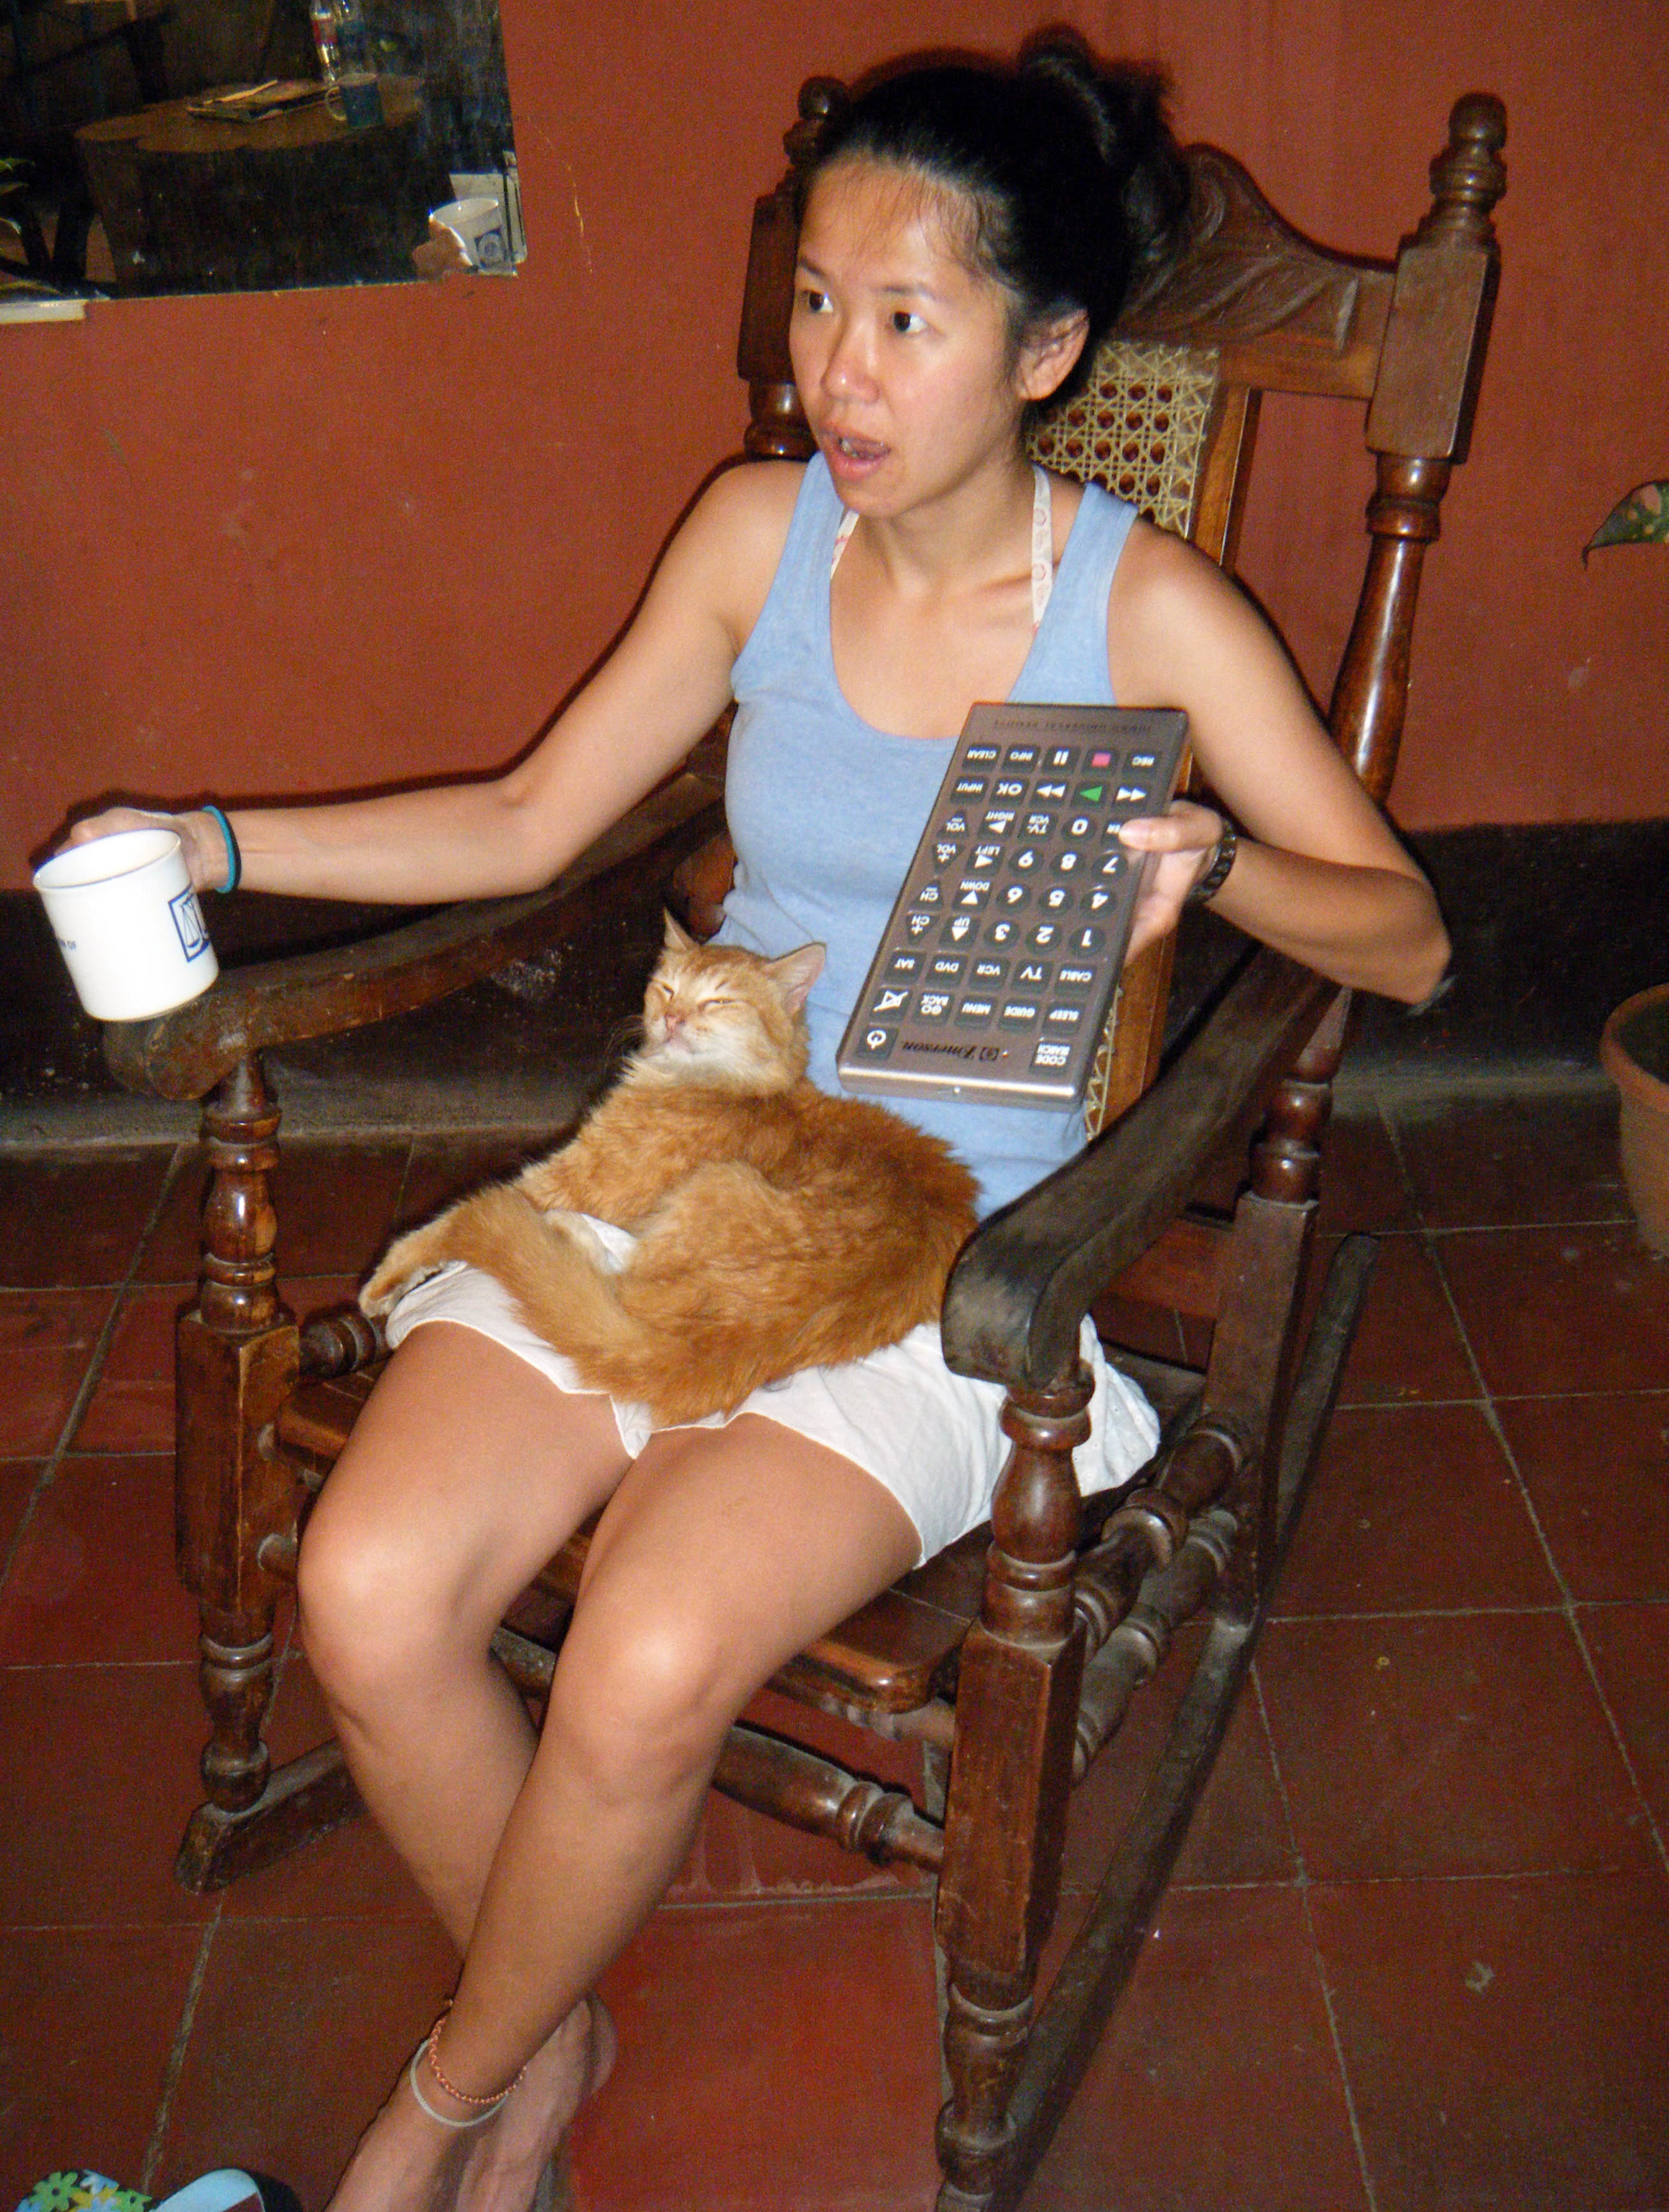 giant remote and kittie.jpg